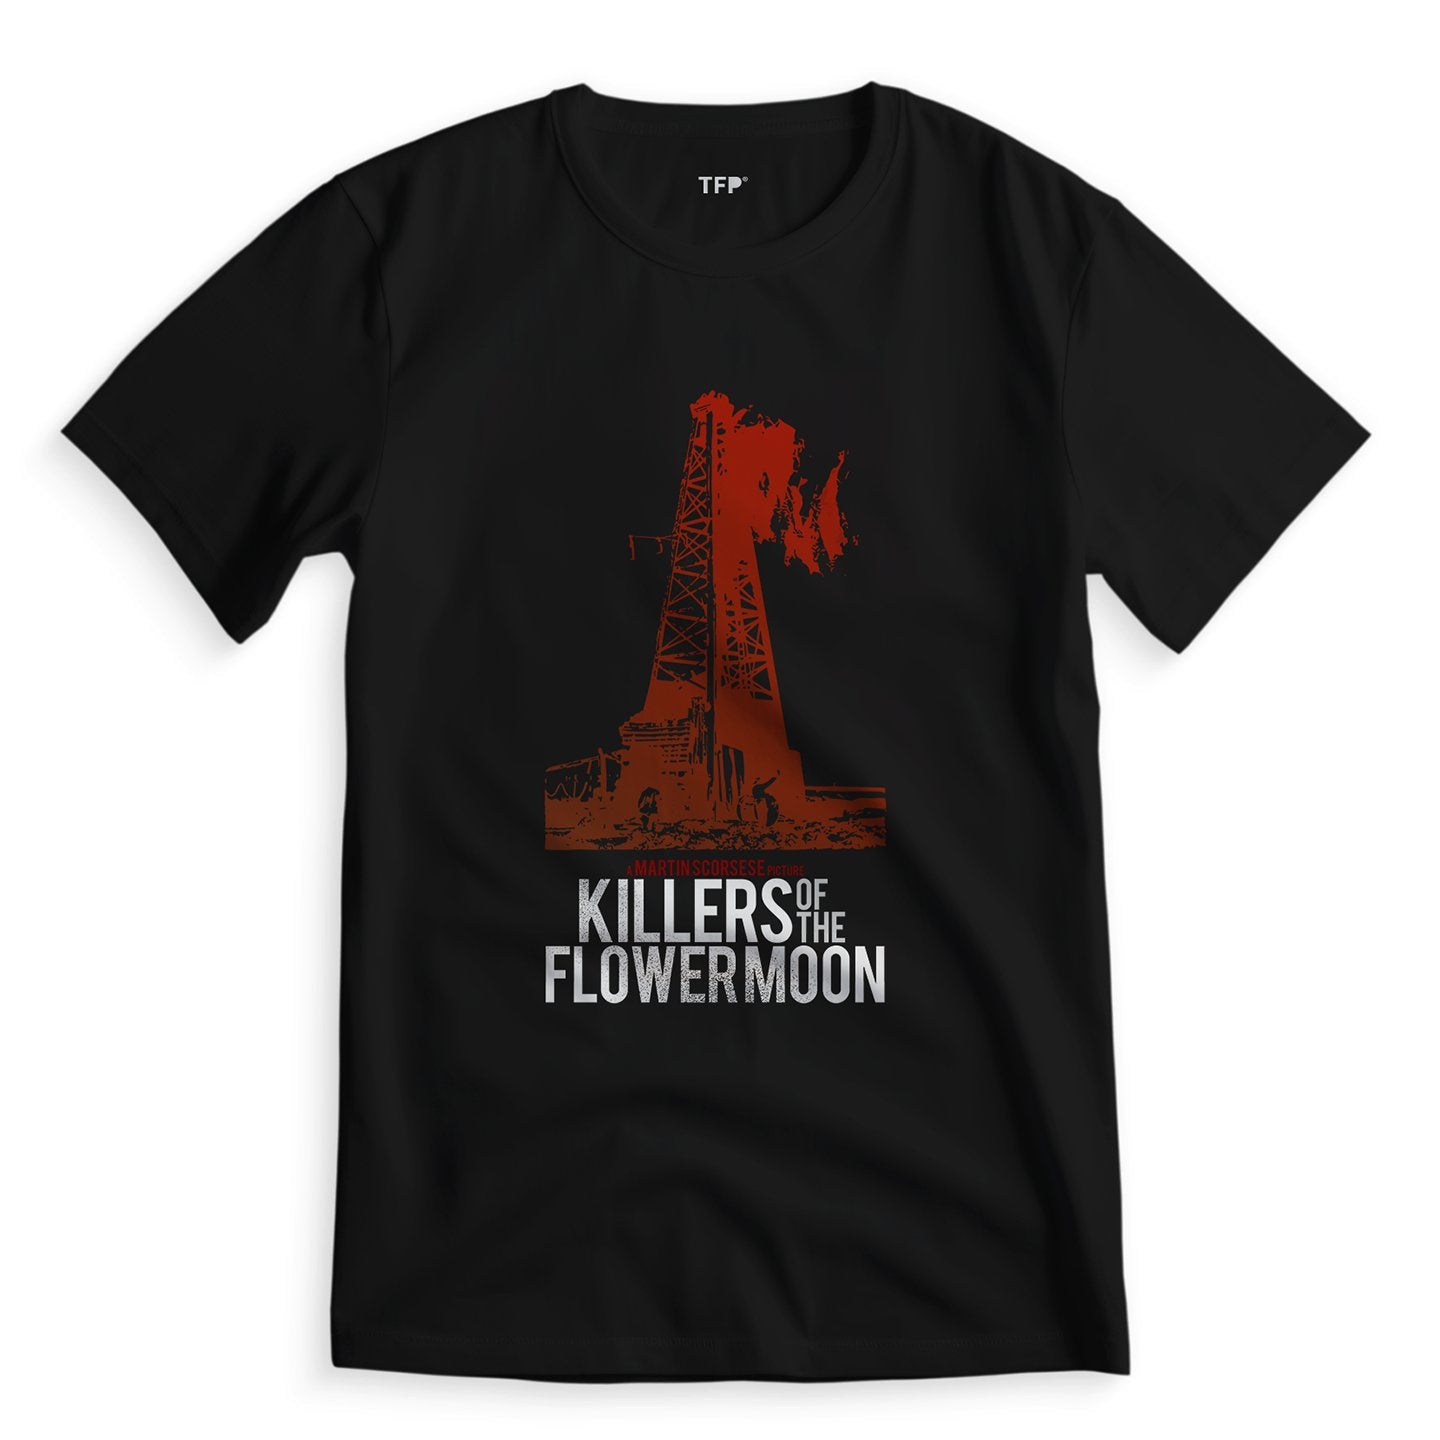 The Killers of the Flower Moon - T-Shirt